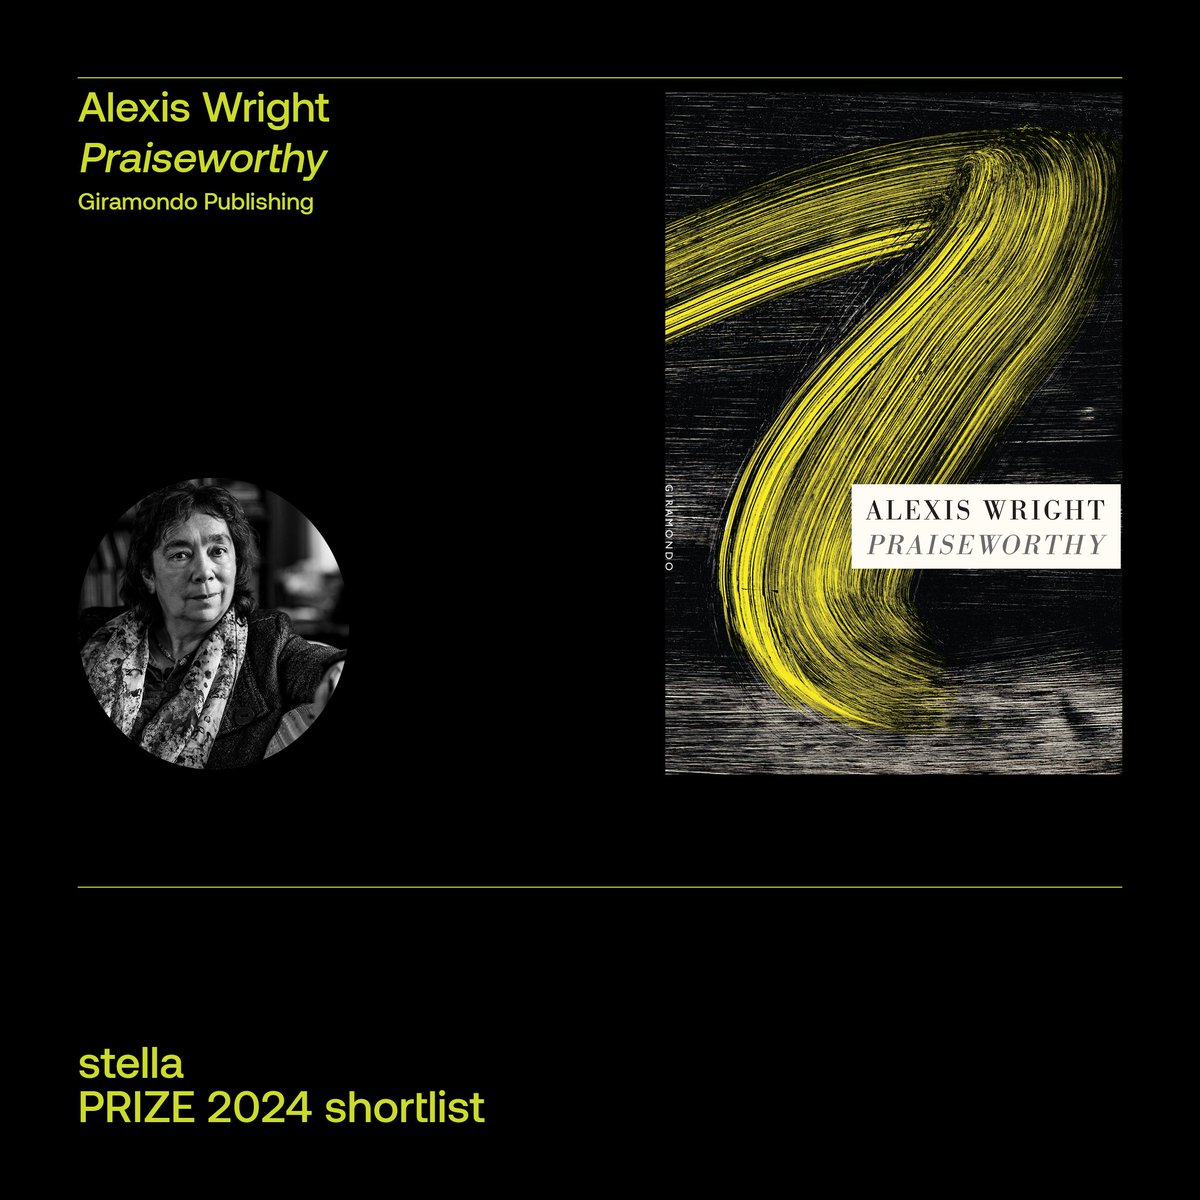 SHORTLISTED: #2024stellaprize Praiseworthy by Alexis Wright ‘A canon-crushing Australian novel for the ages… Fierce and gloriously funny, Praiseworthy is a genre-defiant epic of climate catastrophe proportions.’ — Judges’ comments Learn more: giramondopublishing.com/alexis-wright-…